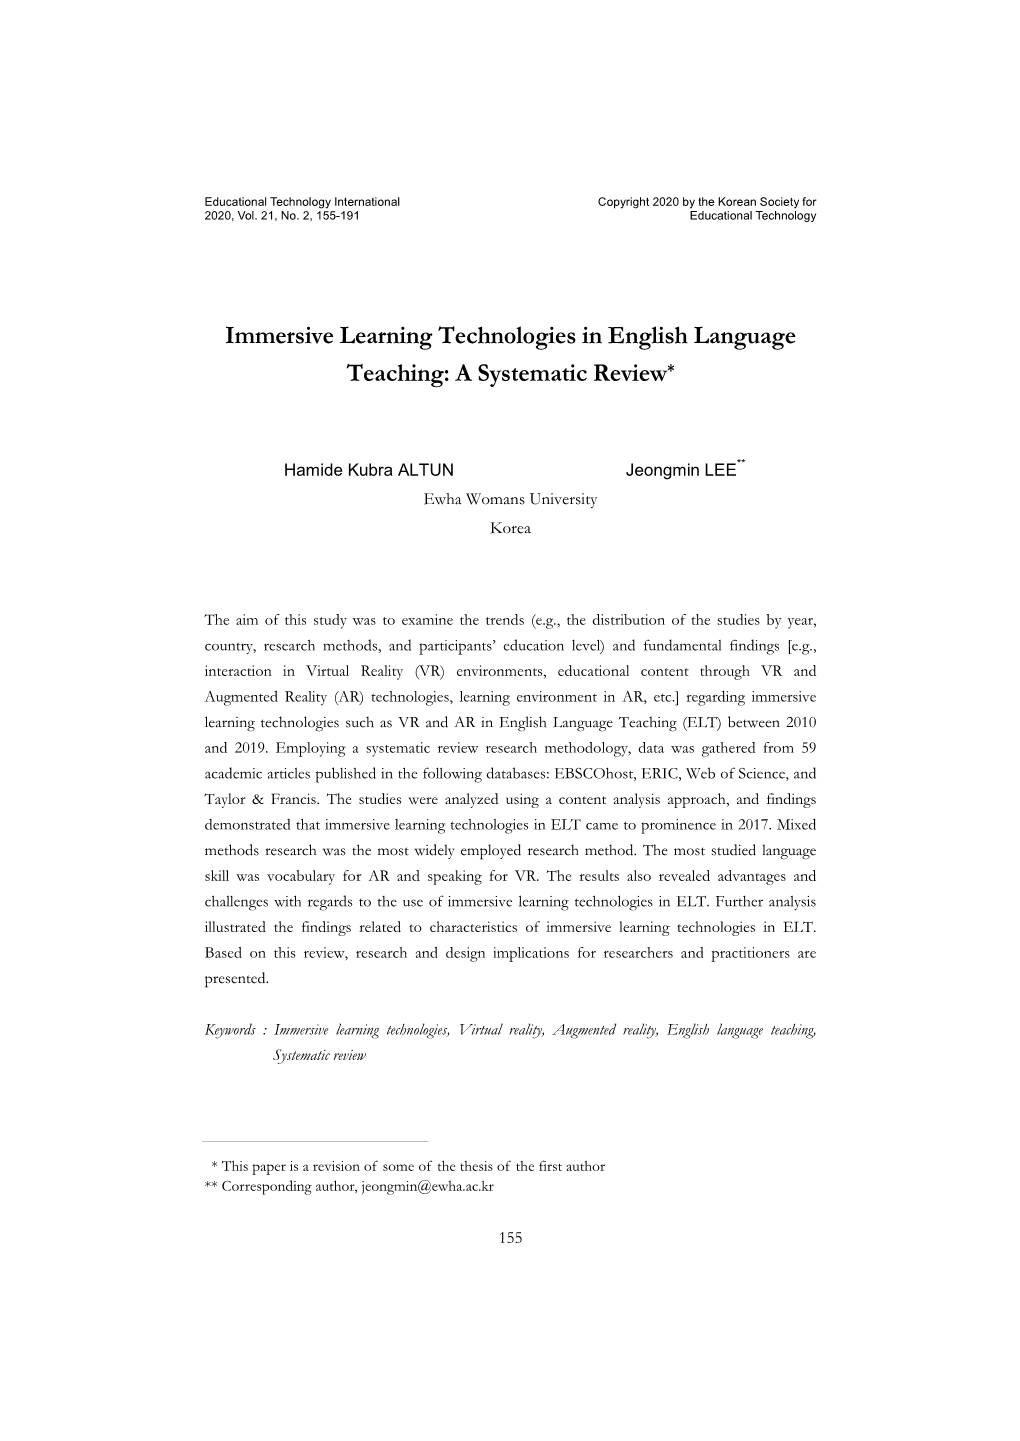 Immersive Learning Technologies in English Language Teaching: a Systematic Review*